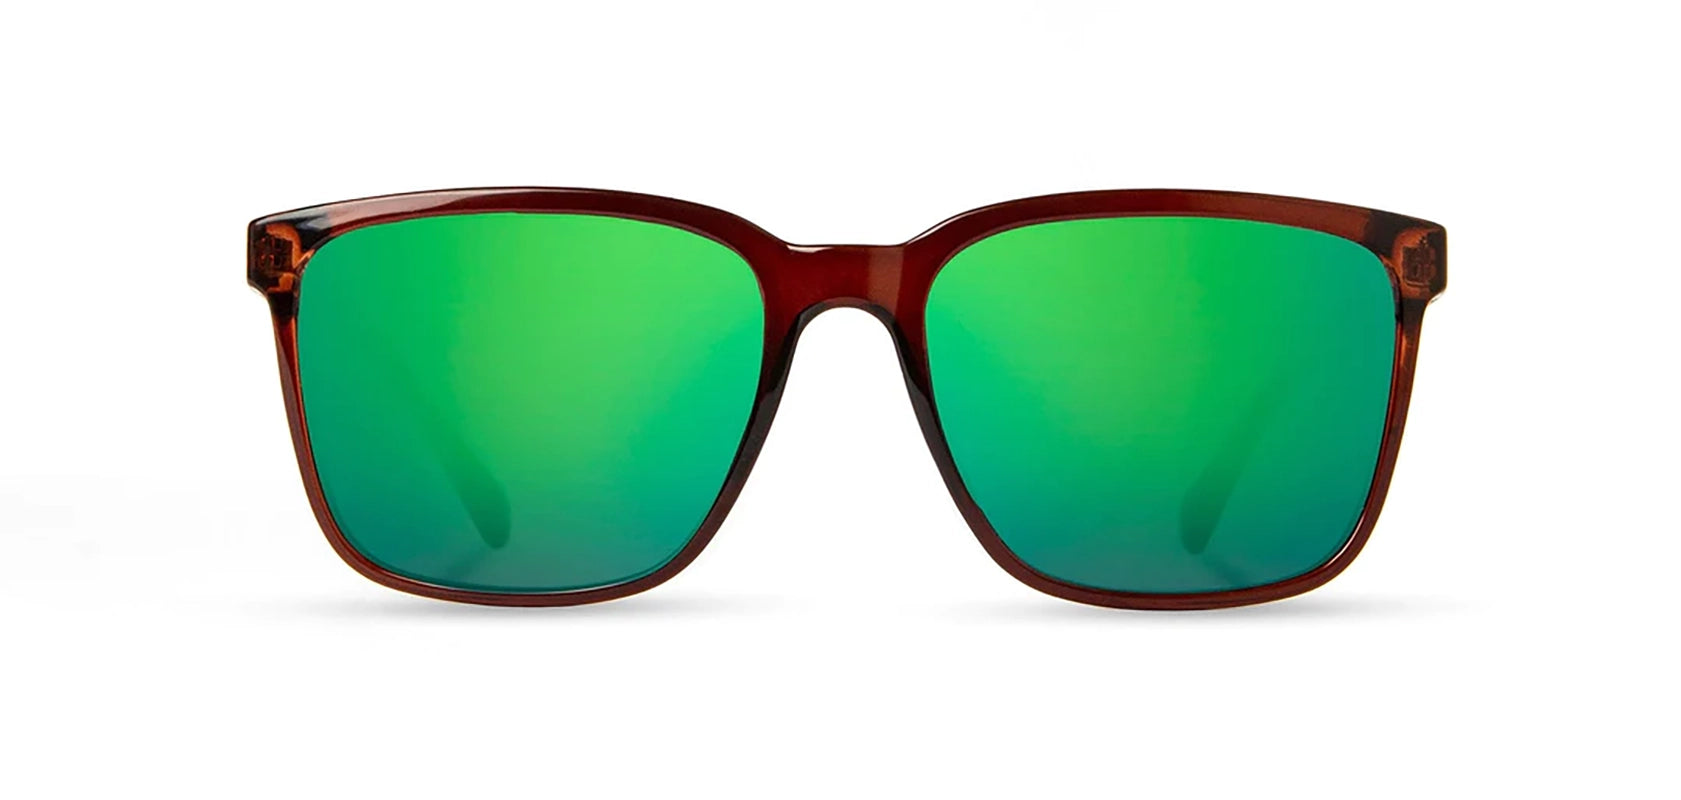 Camp Clay / Walnut Sunglasses with HD + Green Flash polarized Lenses front view